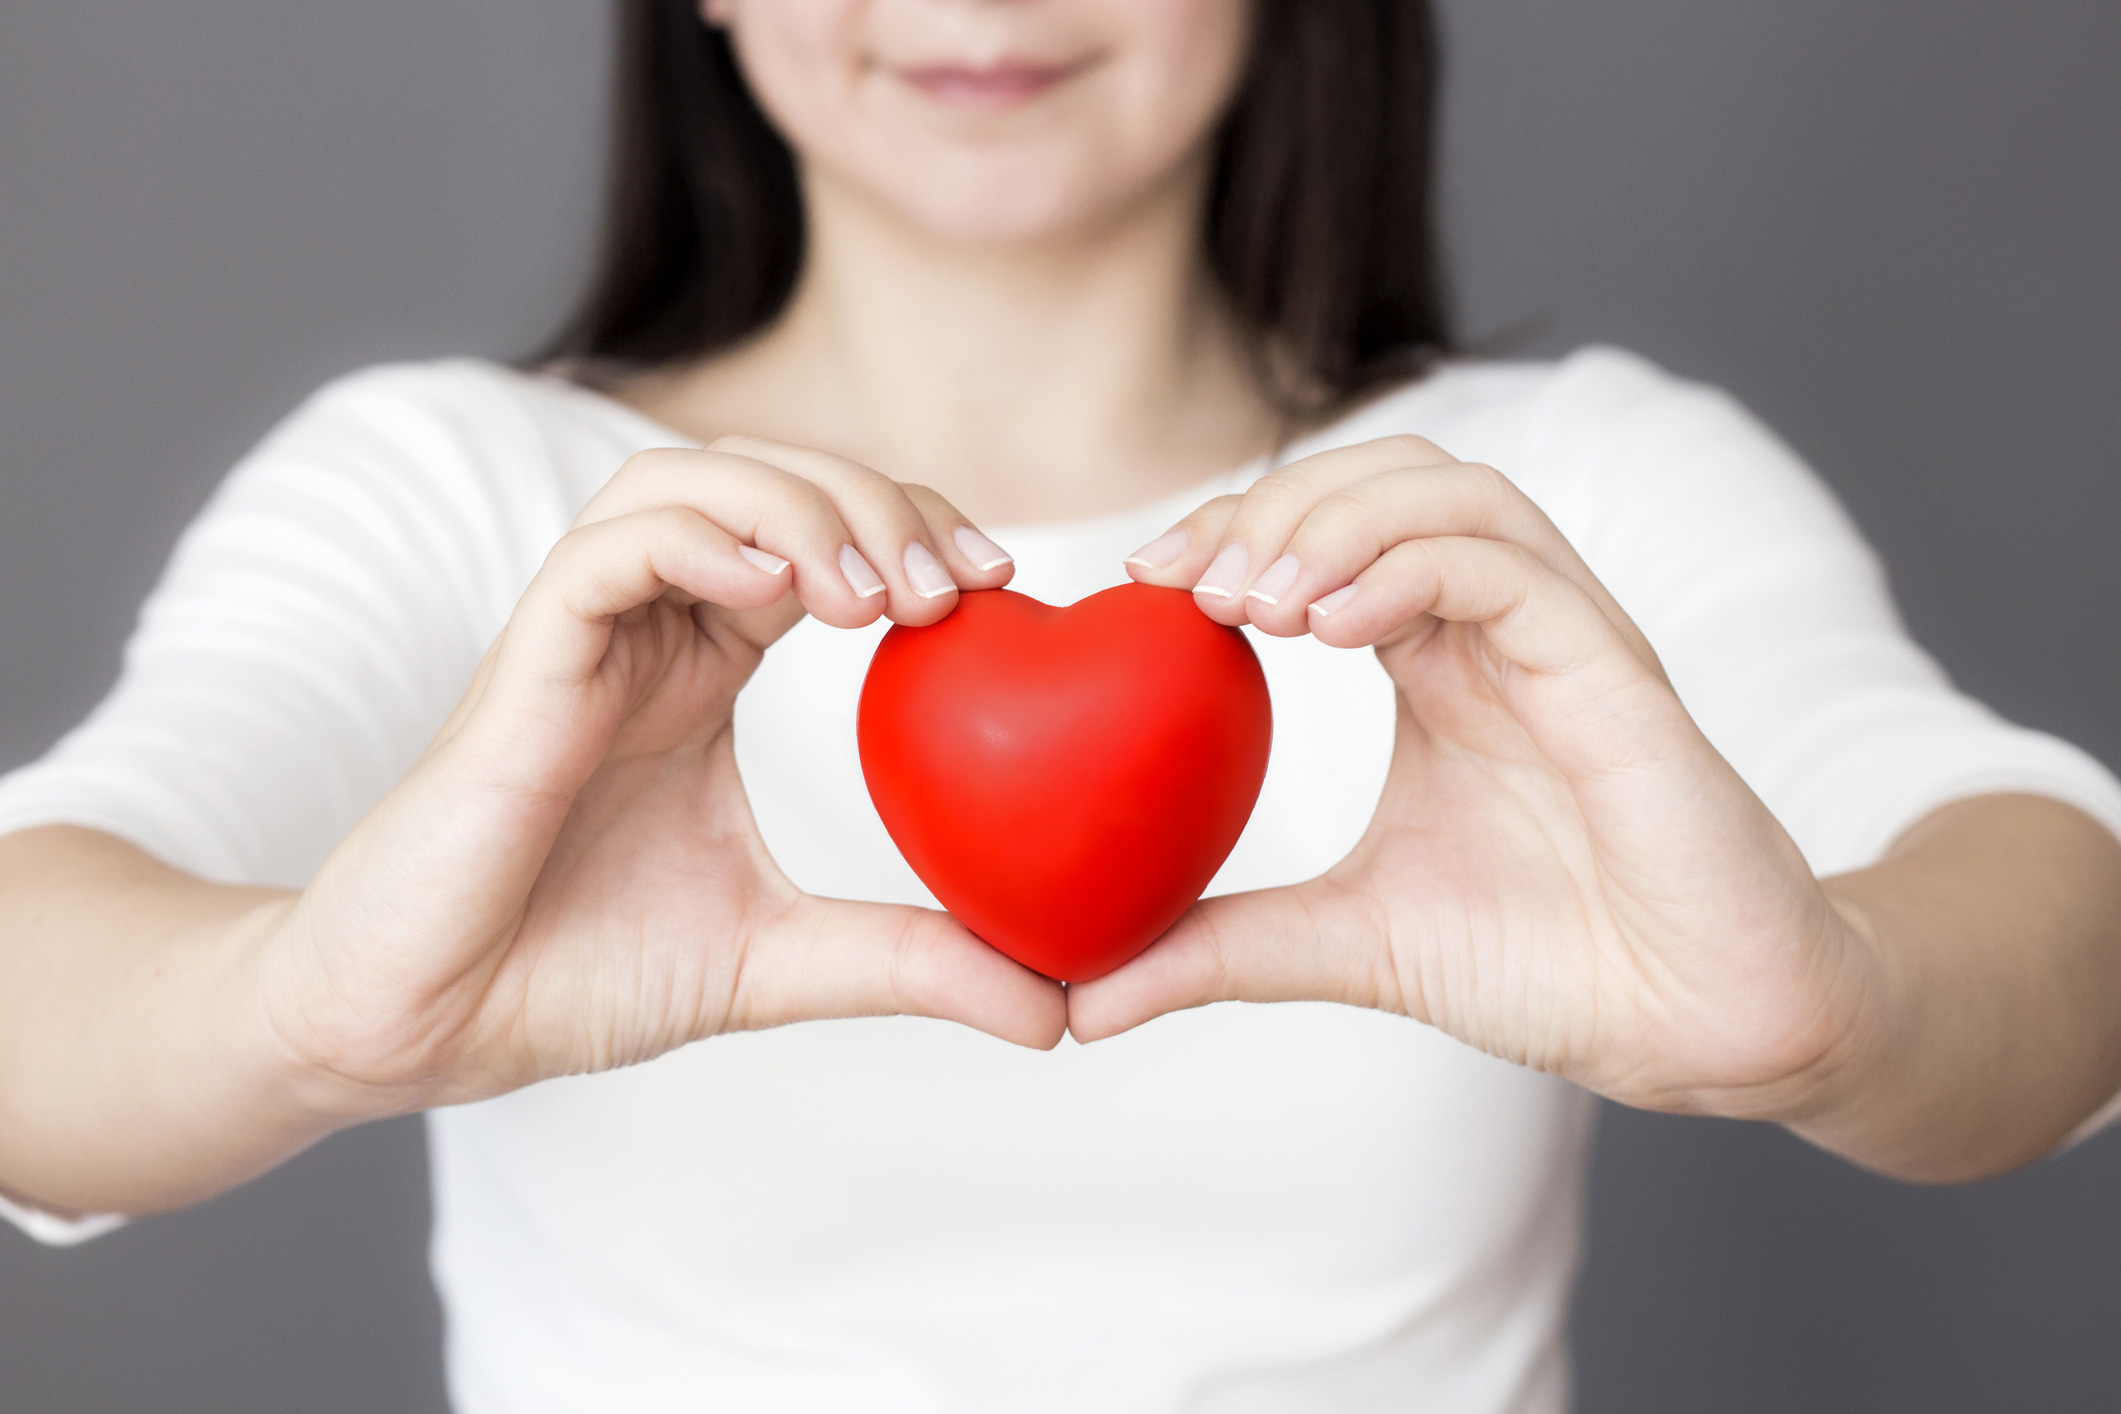 Heart healthy foods: How to protect yourself from heart disease